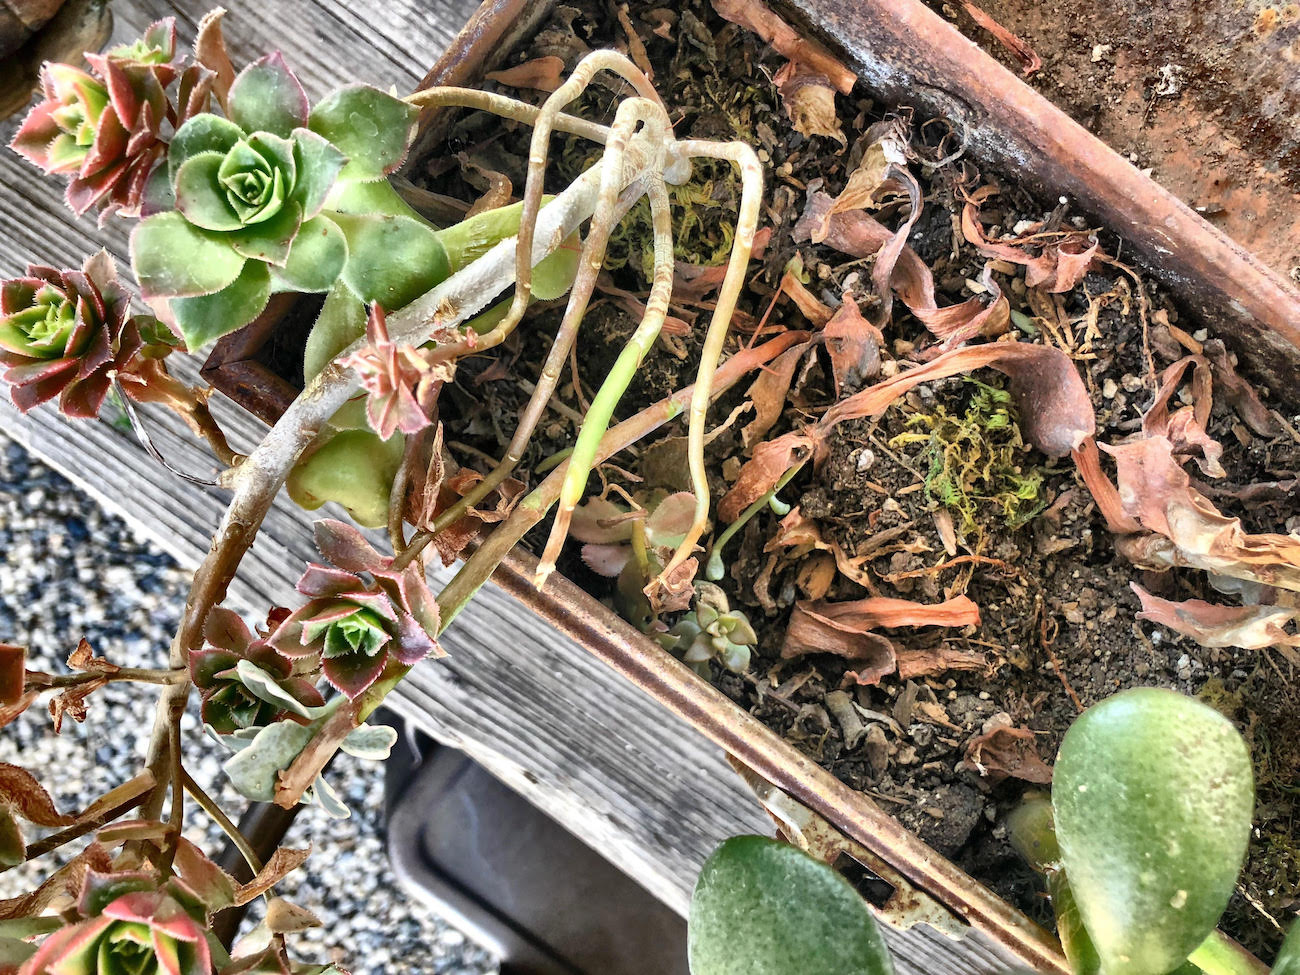 Old neglected succulents were replaced